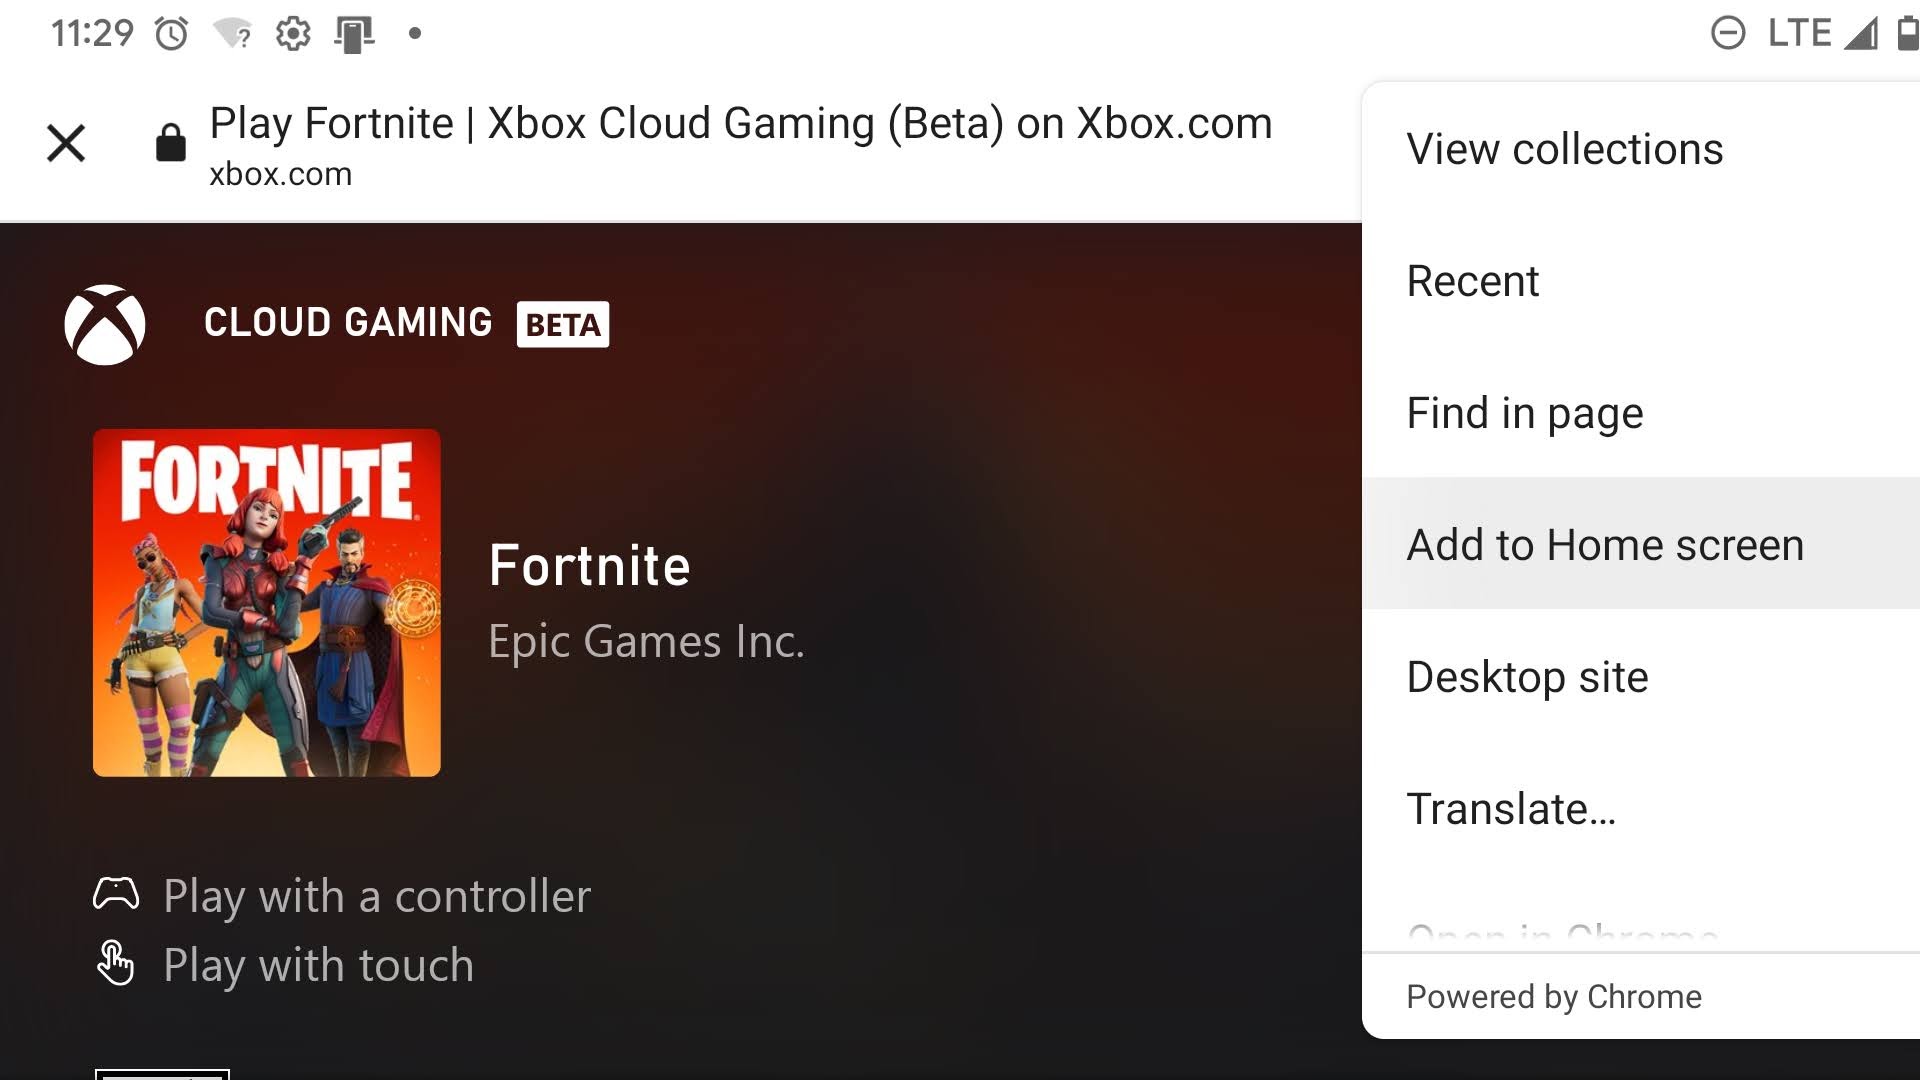 Adding Fortnite and Xbox Cloud games to the home screen